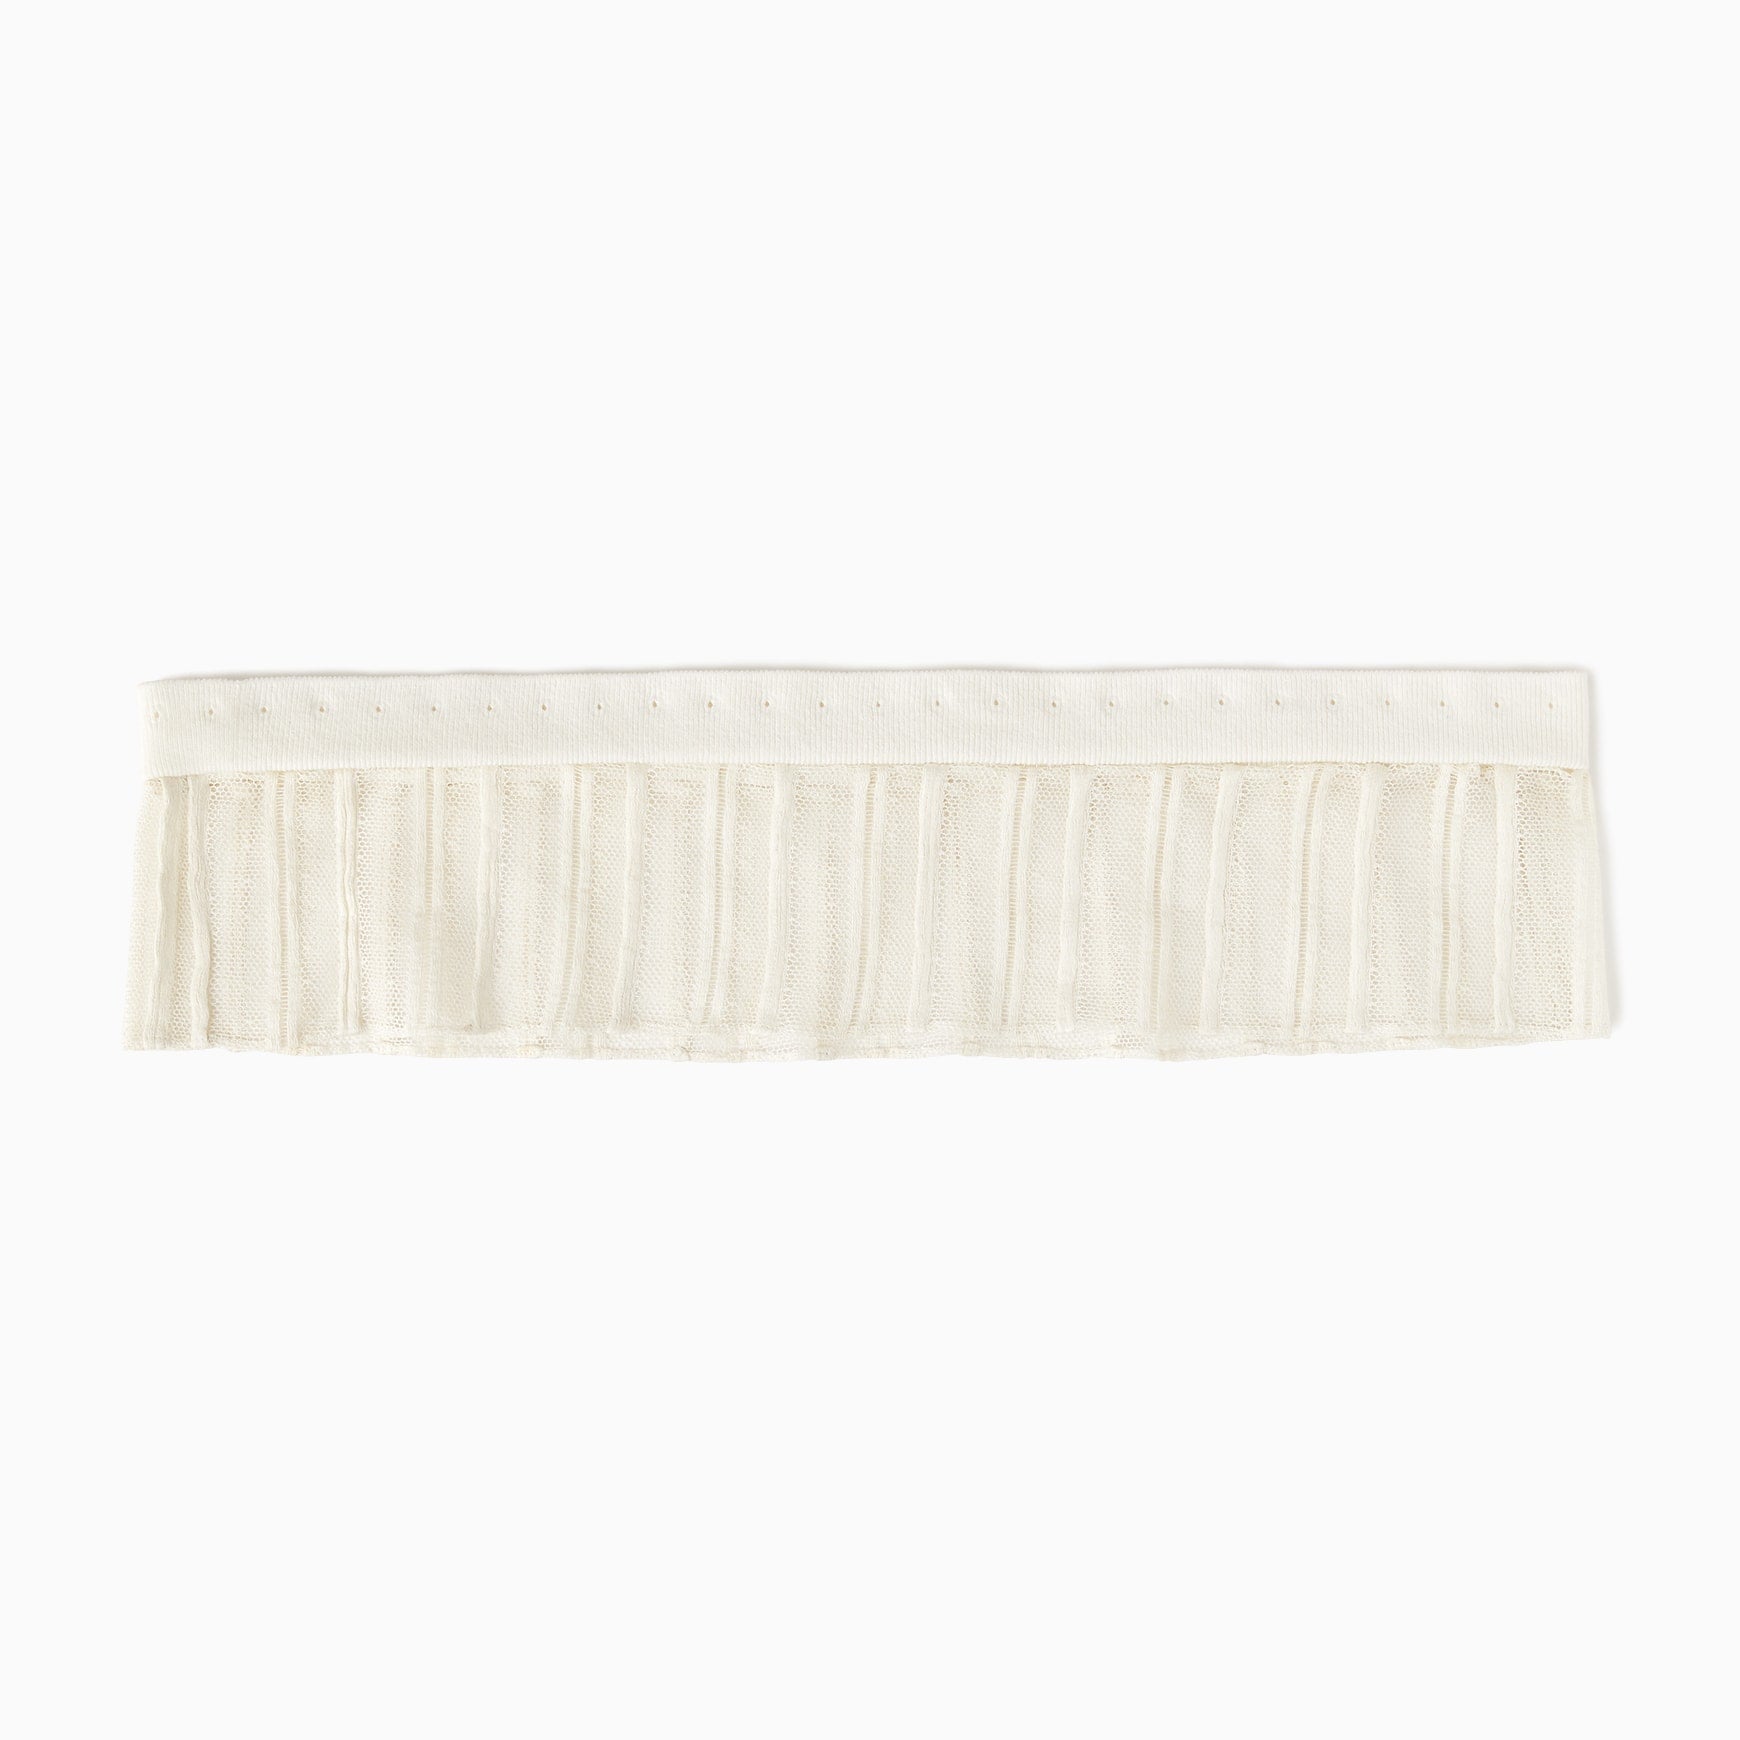 TYPE-1 Knit French Lace Waist Part (White Stripes)